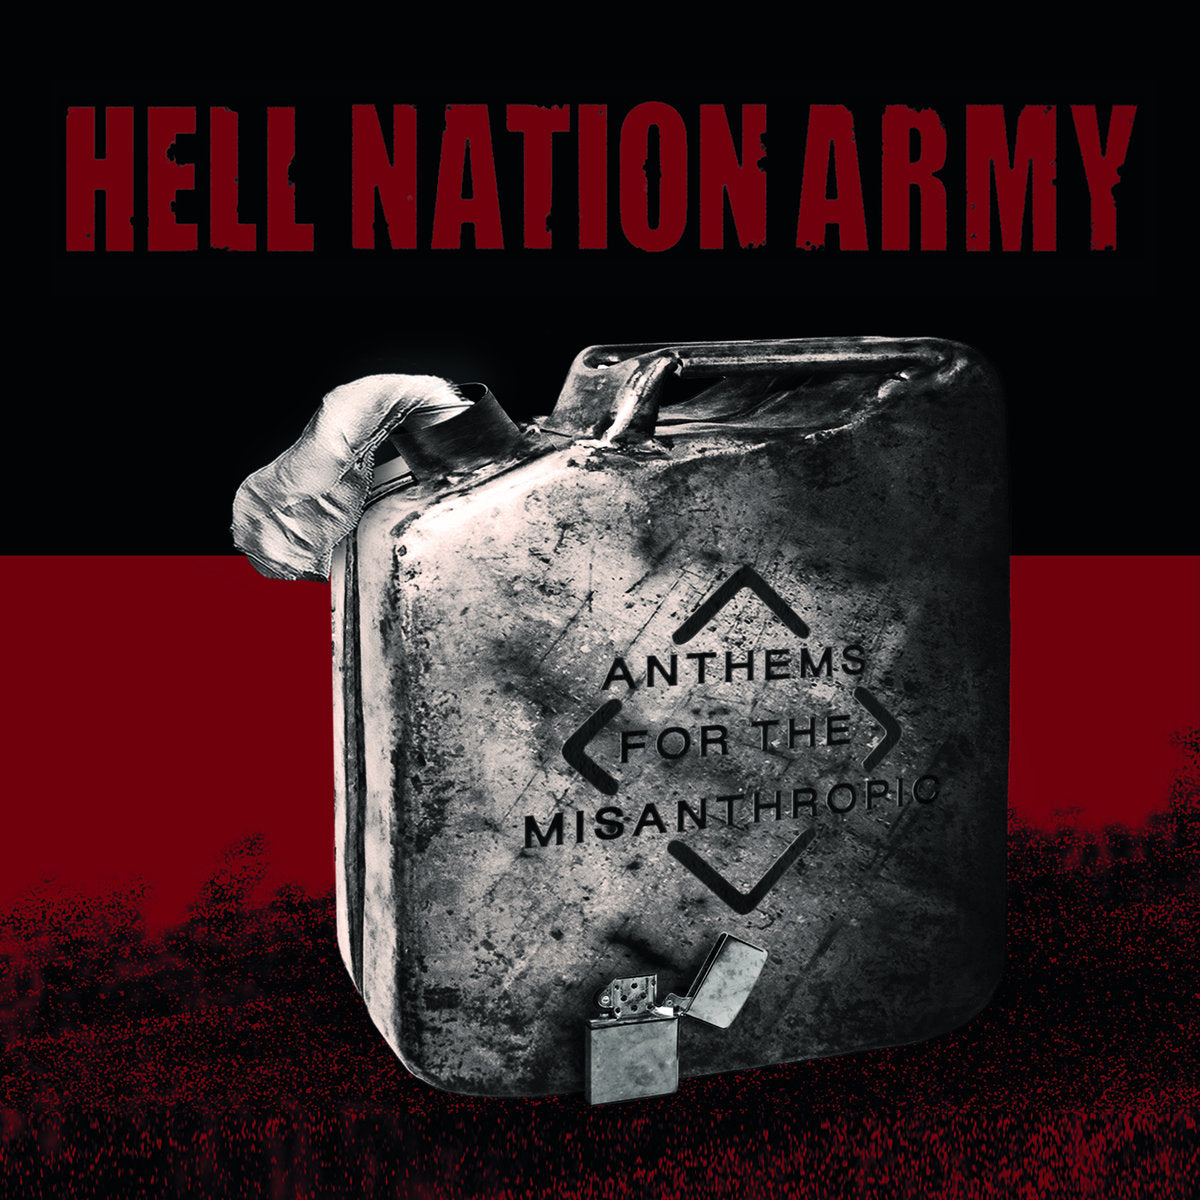 Hell Nation Army- Anthems For The Misanthropic CD ~GLUECIFER!